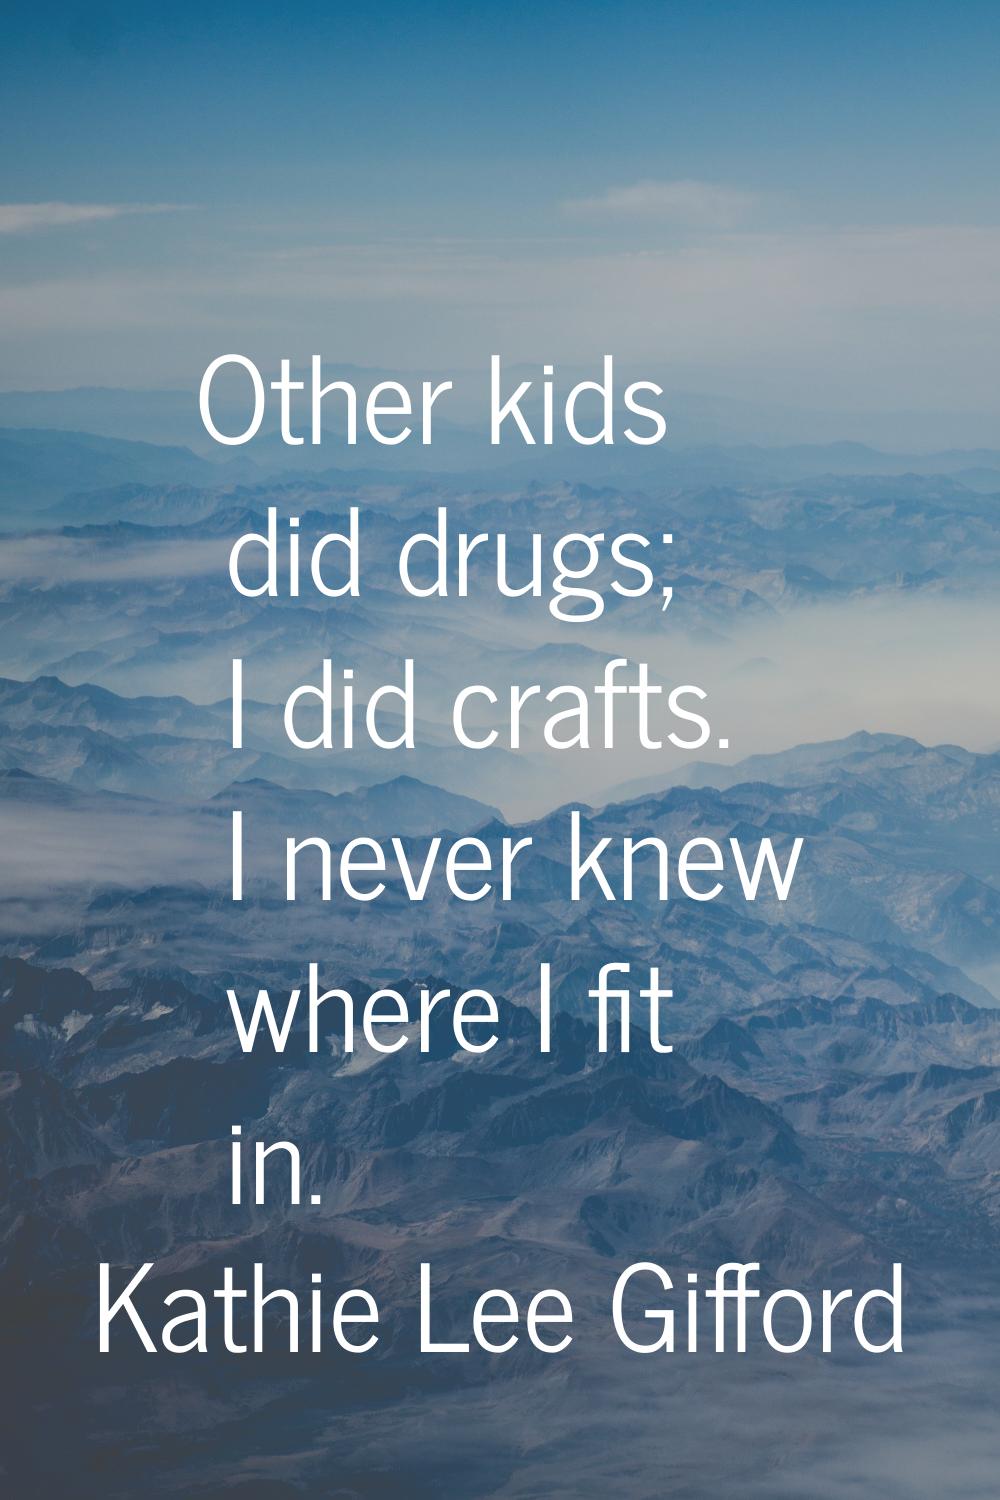 Other kids did drugs; I did crafts. I never knew where I fit in.